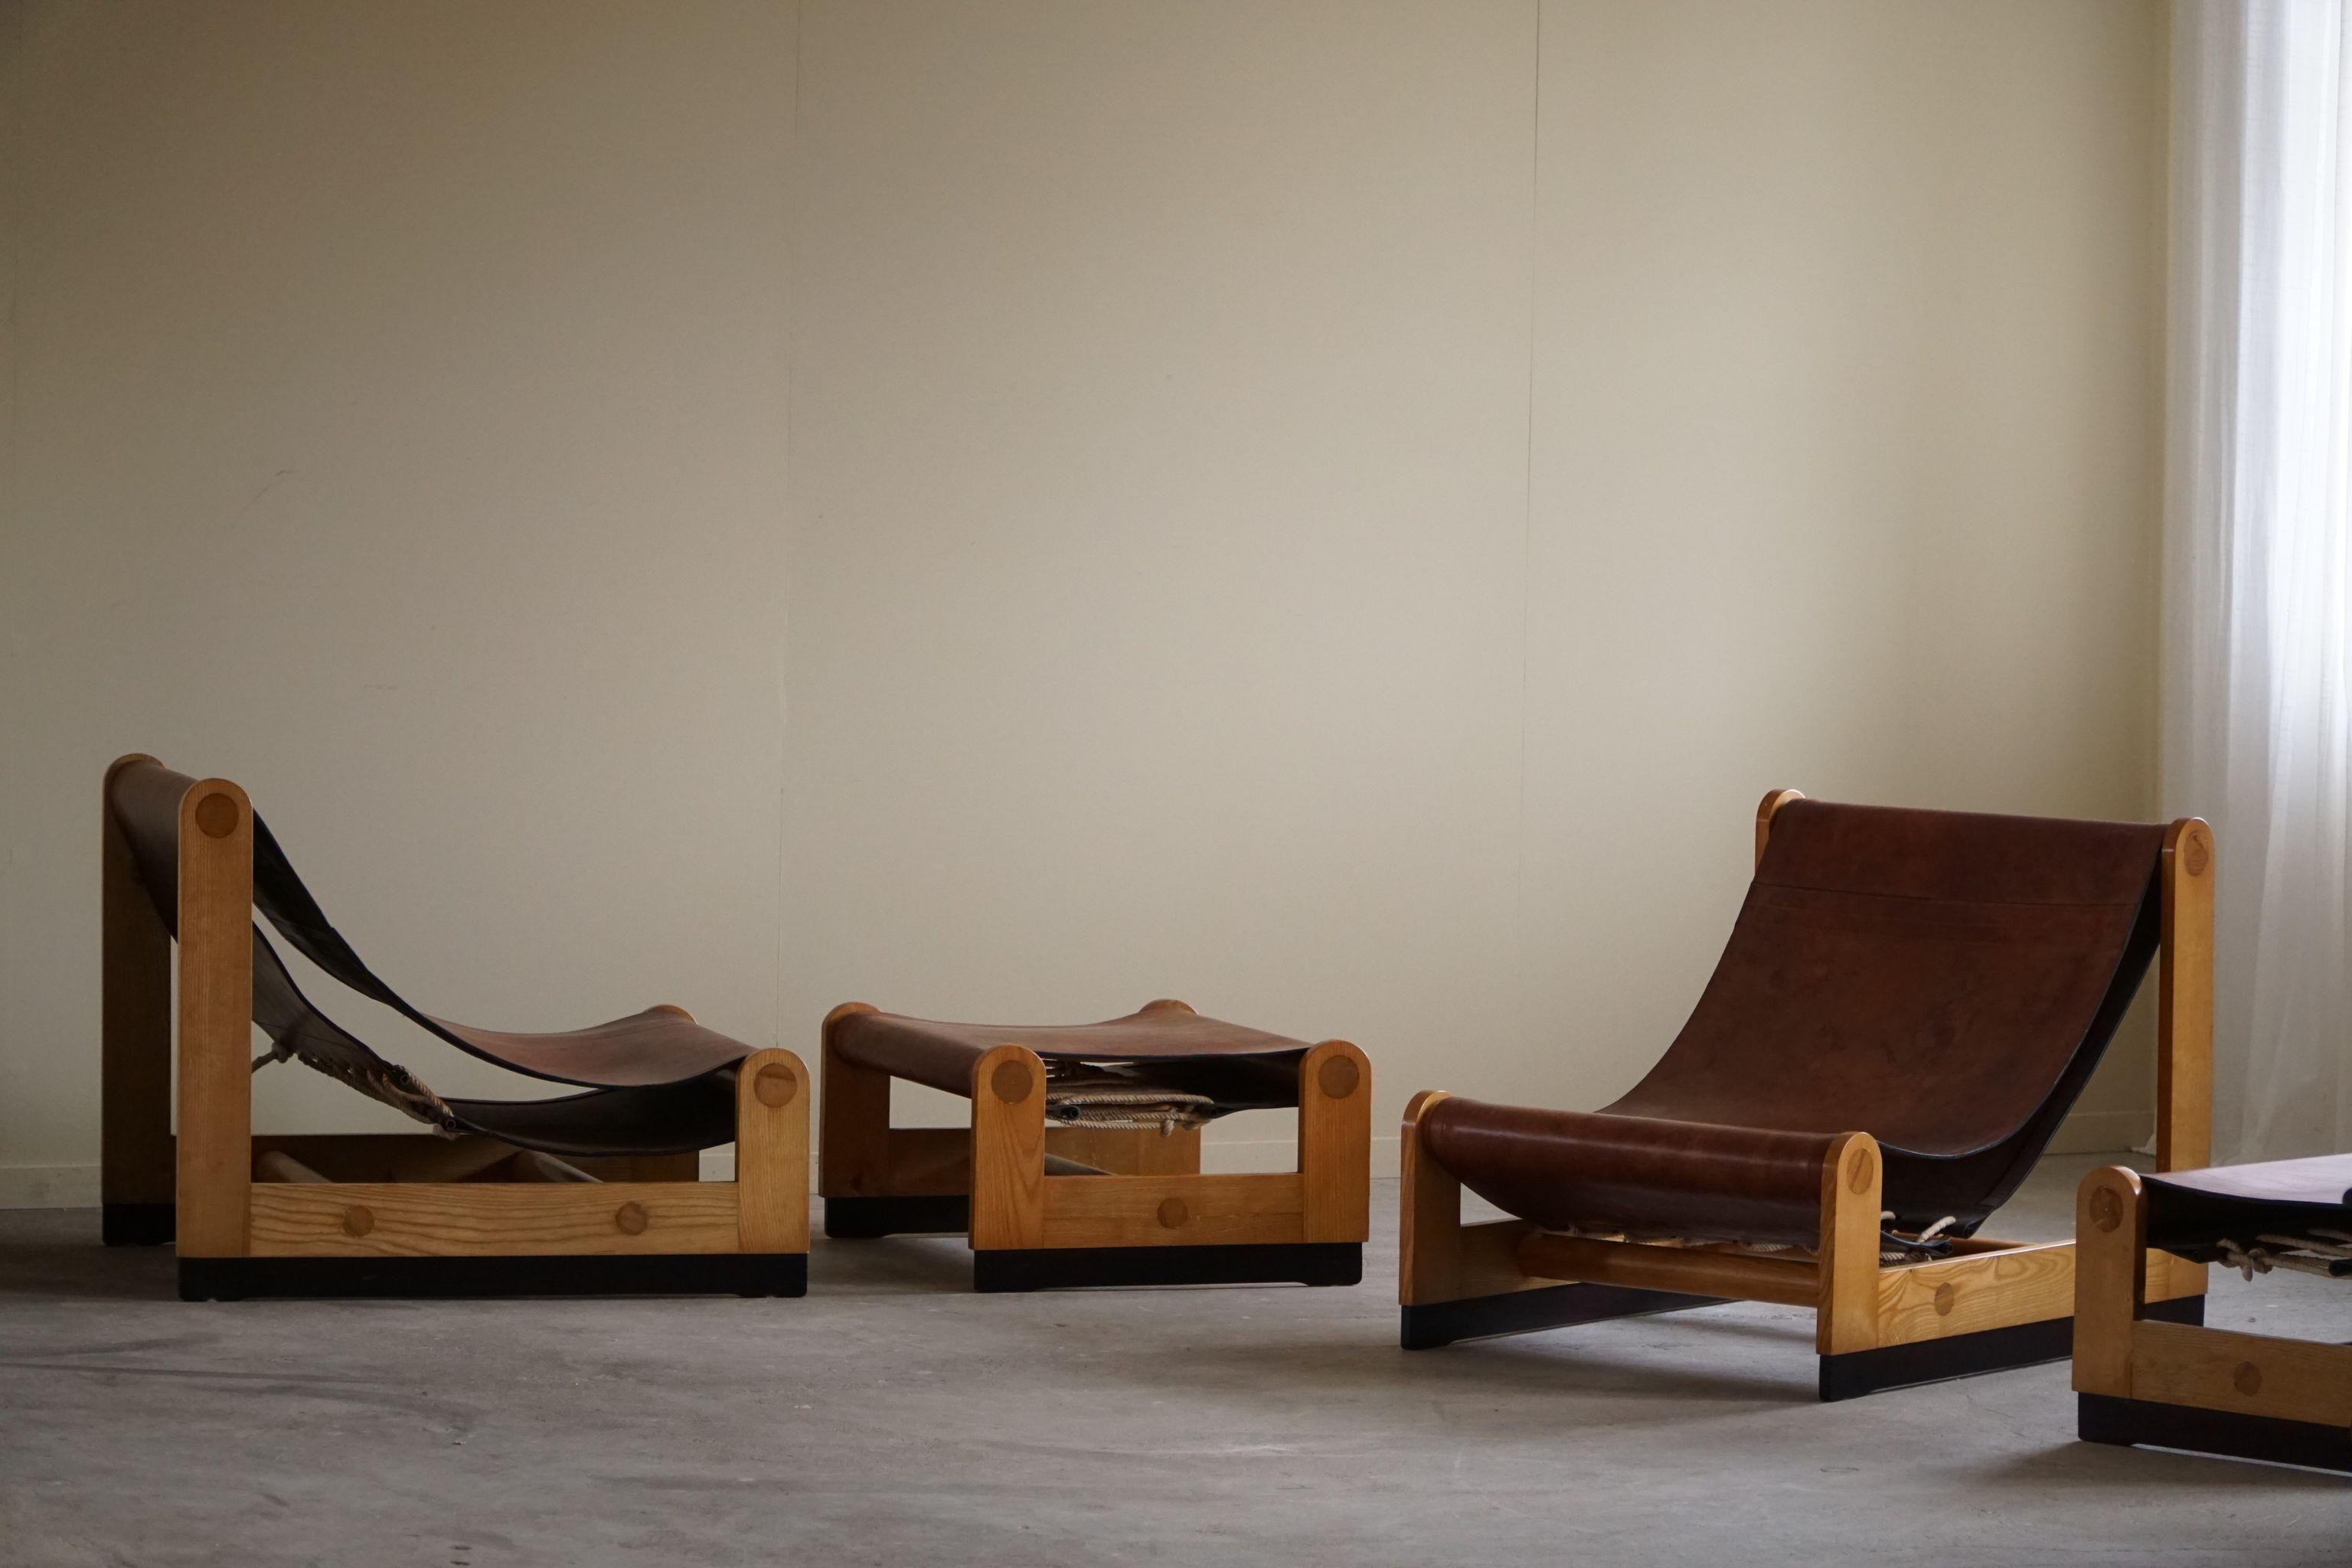 Francesco Lucianetti, Lounge Chairs in Leather & Elm, Italian Modern, 1960s For Sale 15